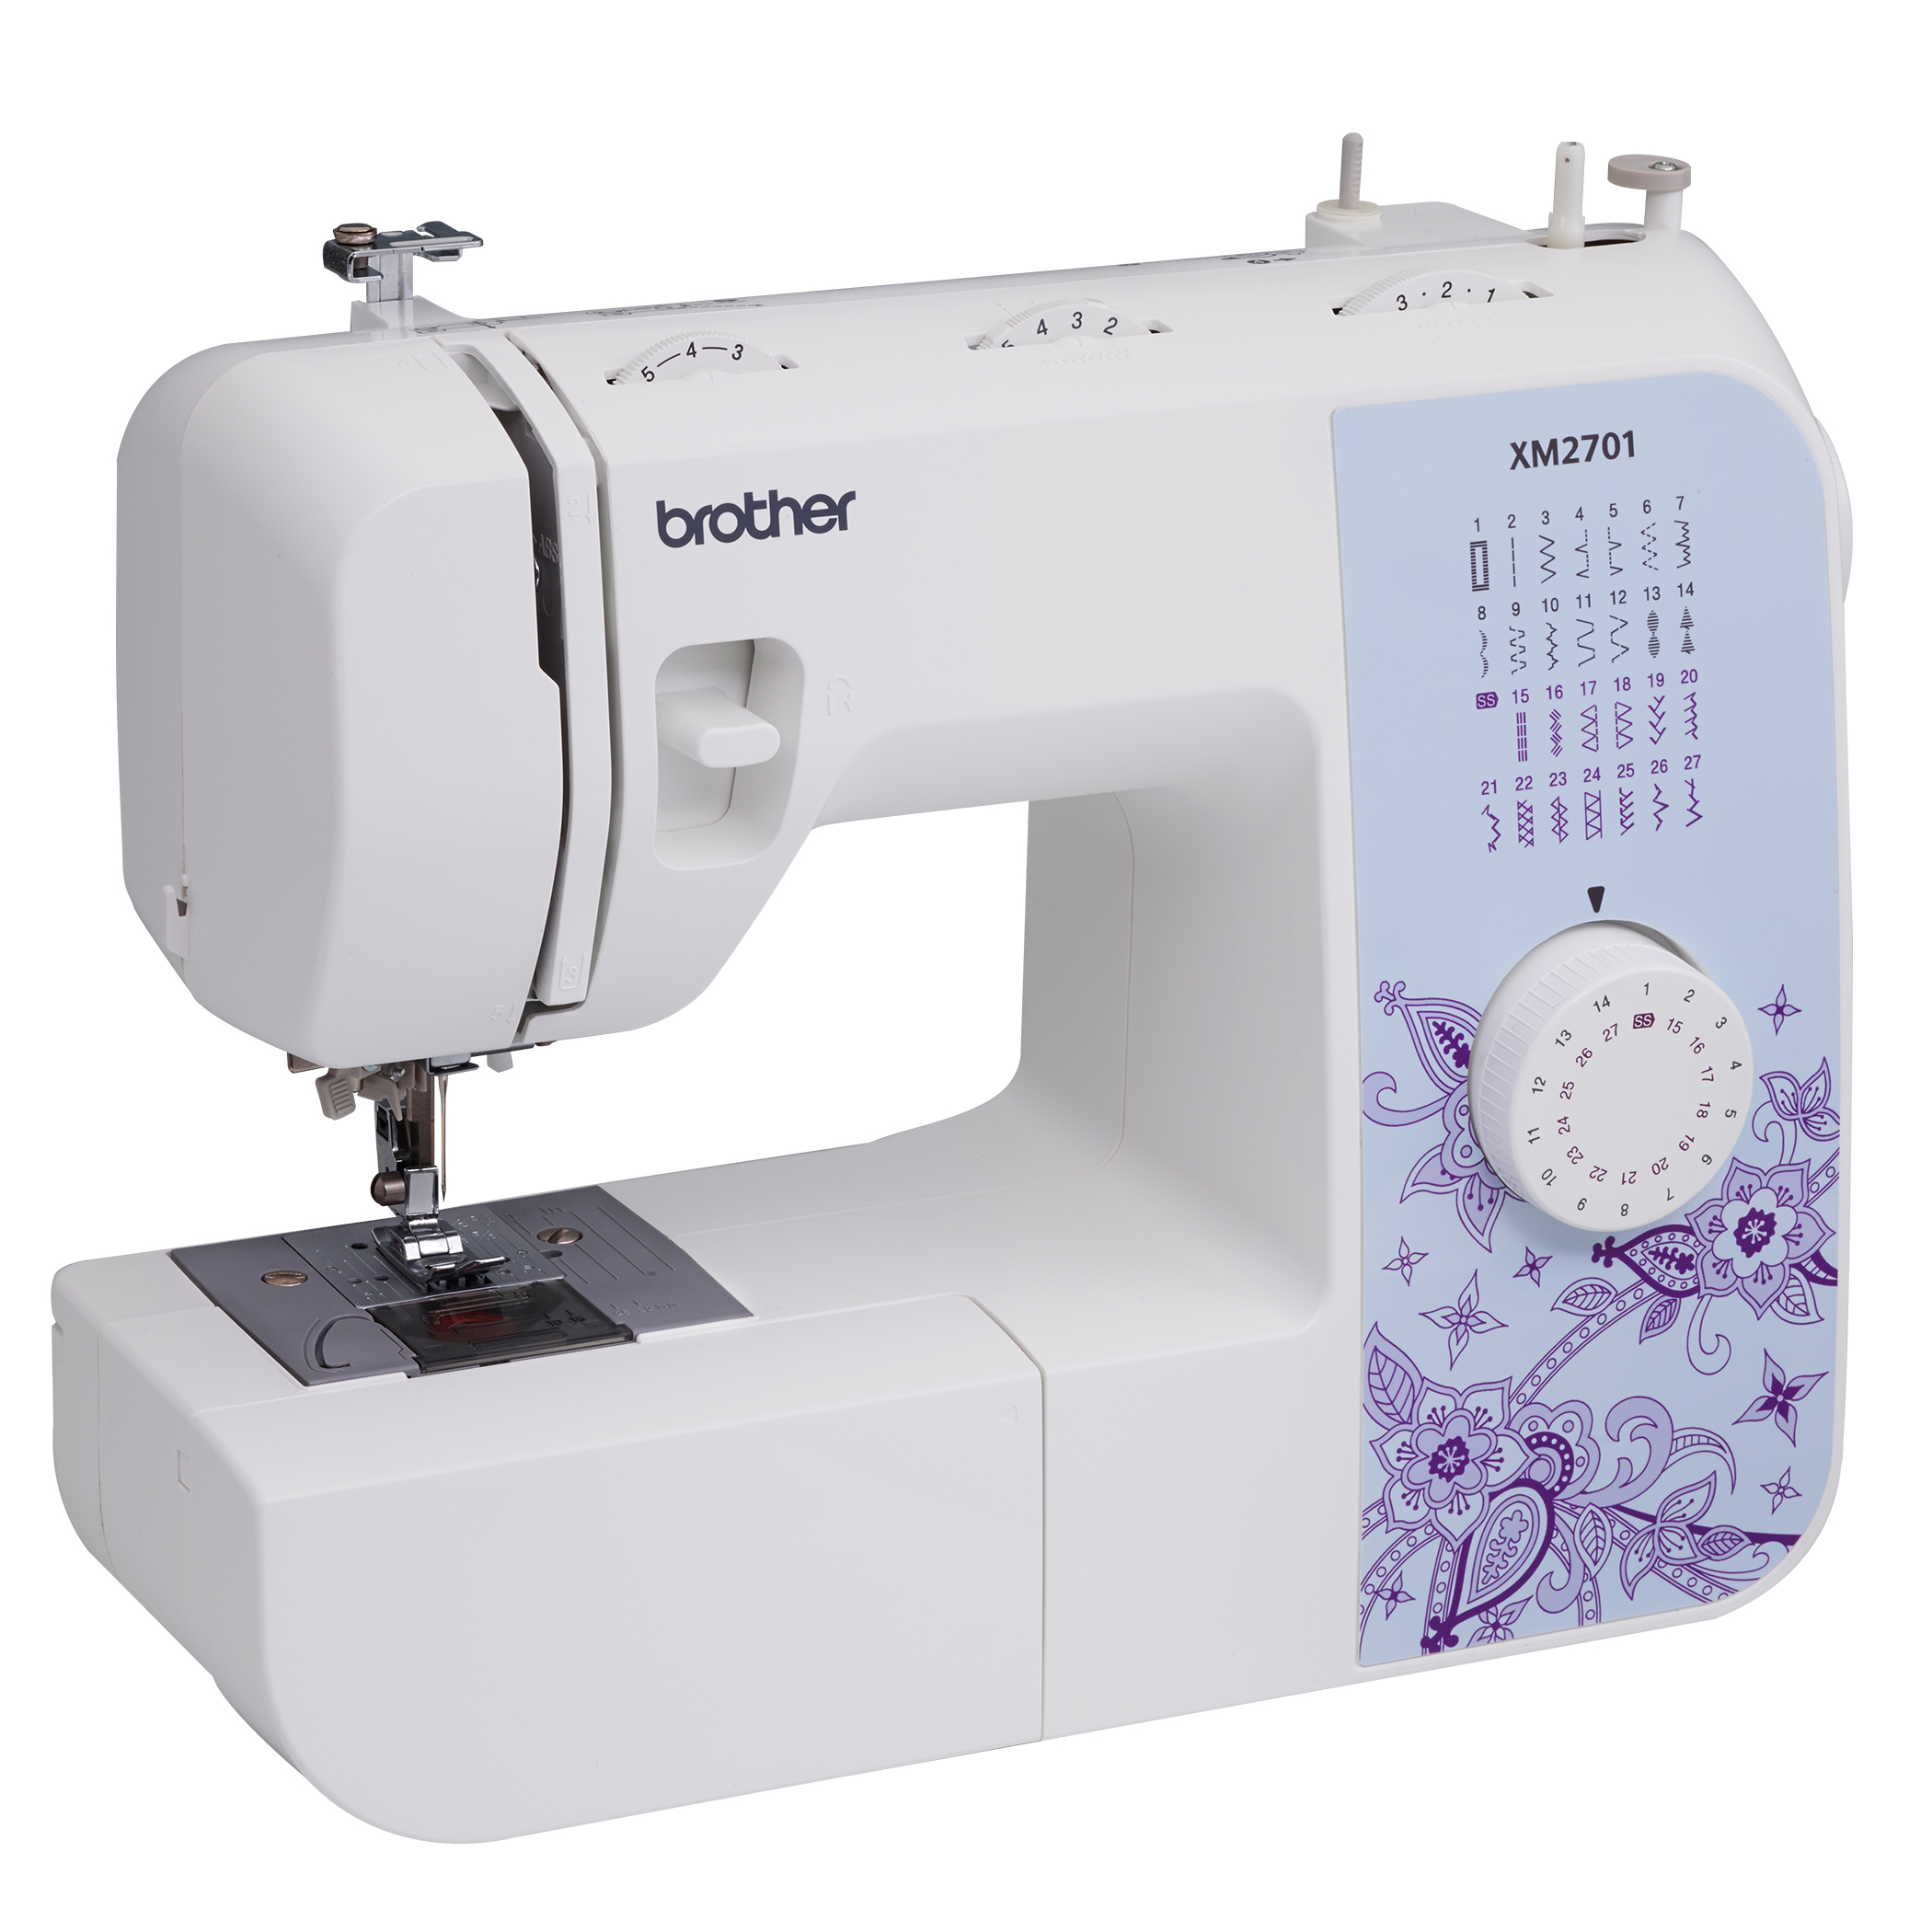 Brother XM2701 Portable, Mechanical, Full-Featured Sewing Machine with 27 Stitches - image 10 of 13